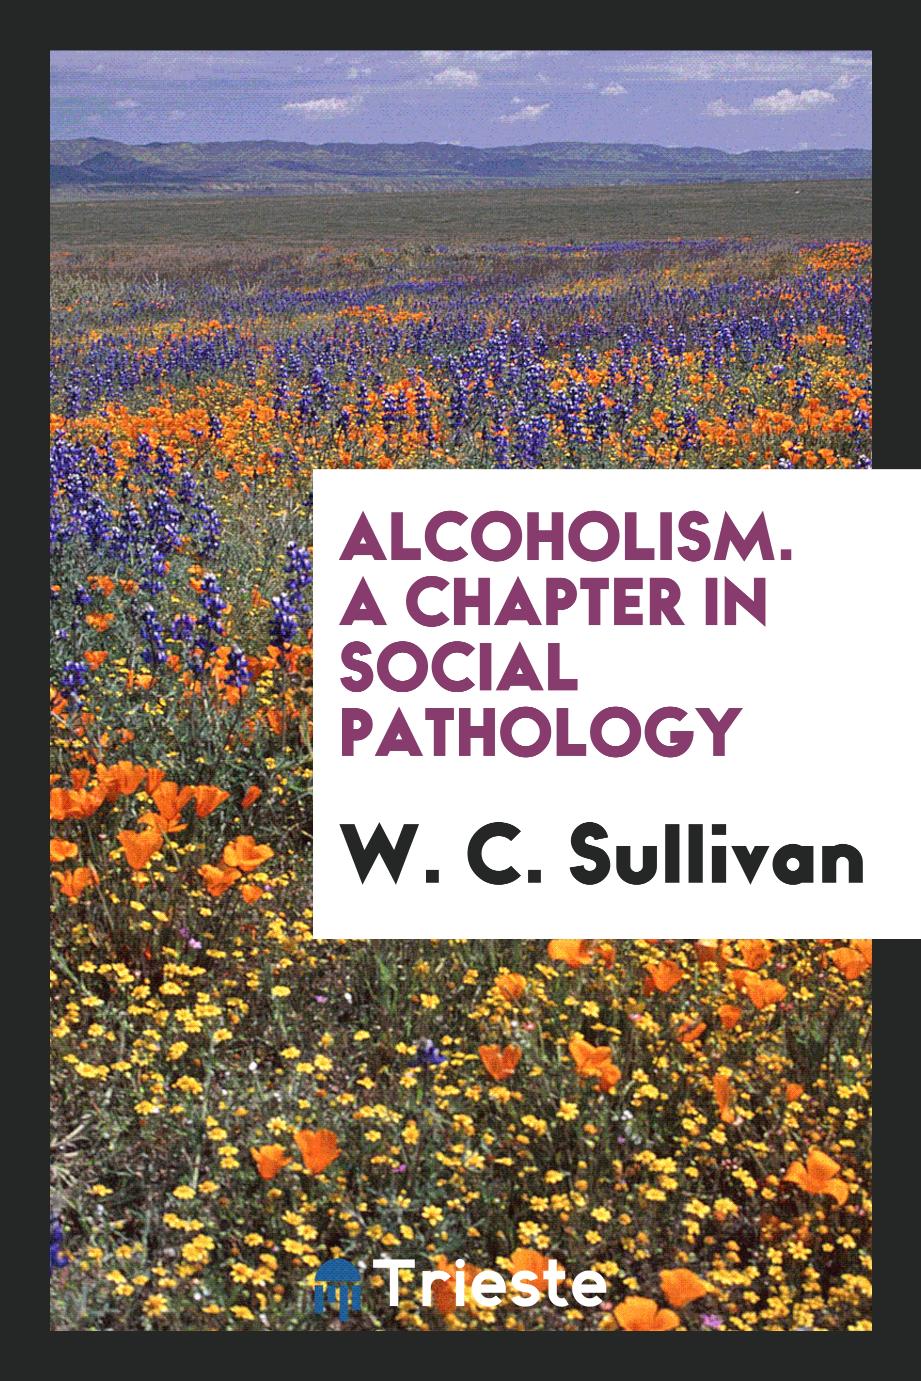 Alcoholism. A chapter in social pathology